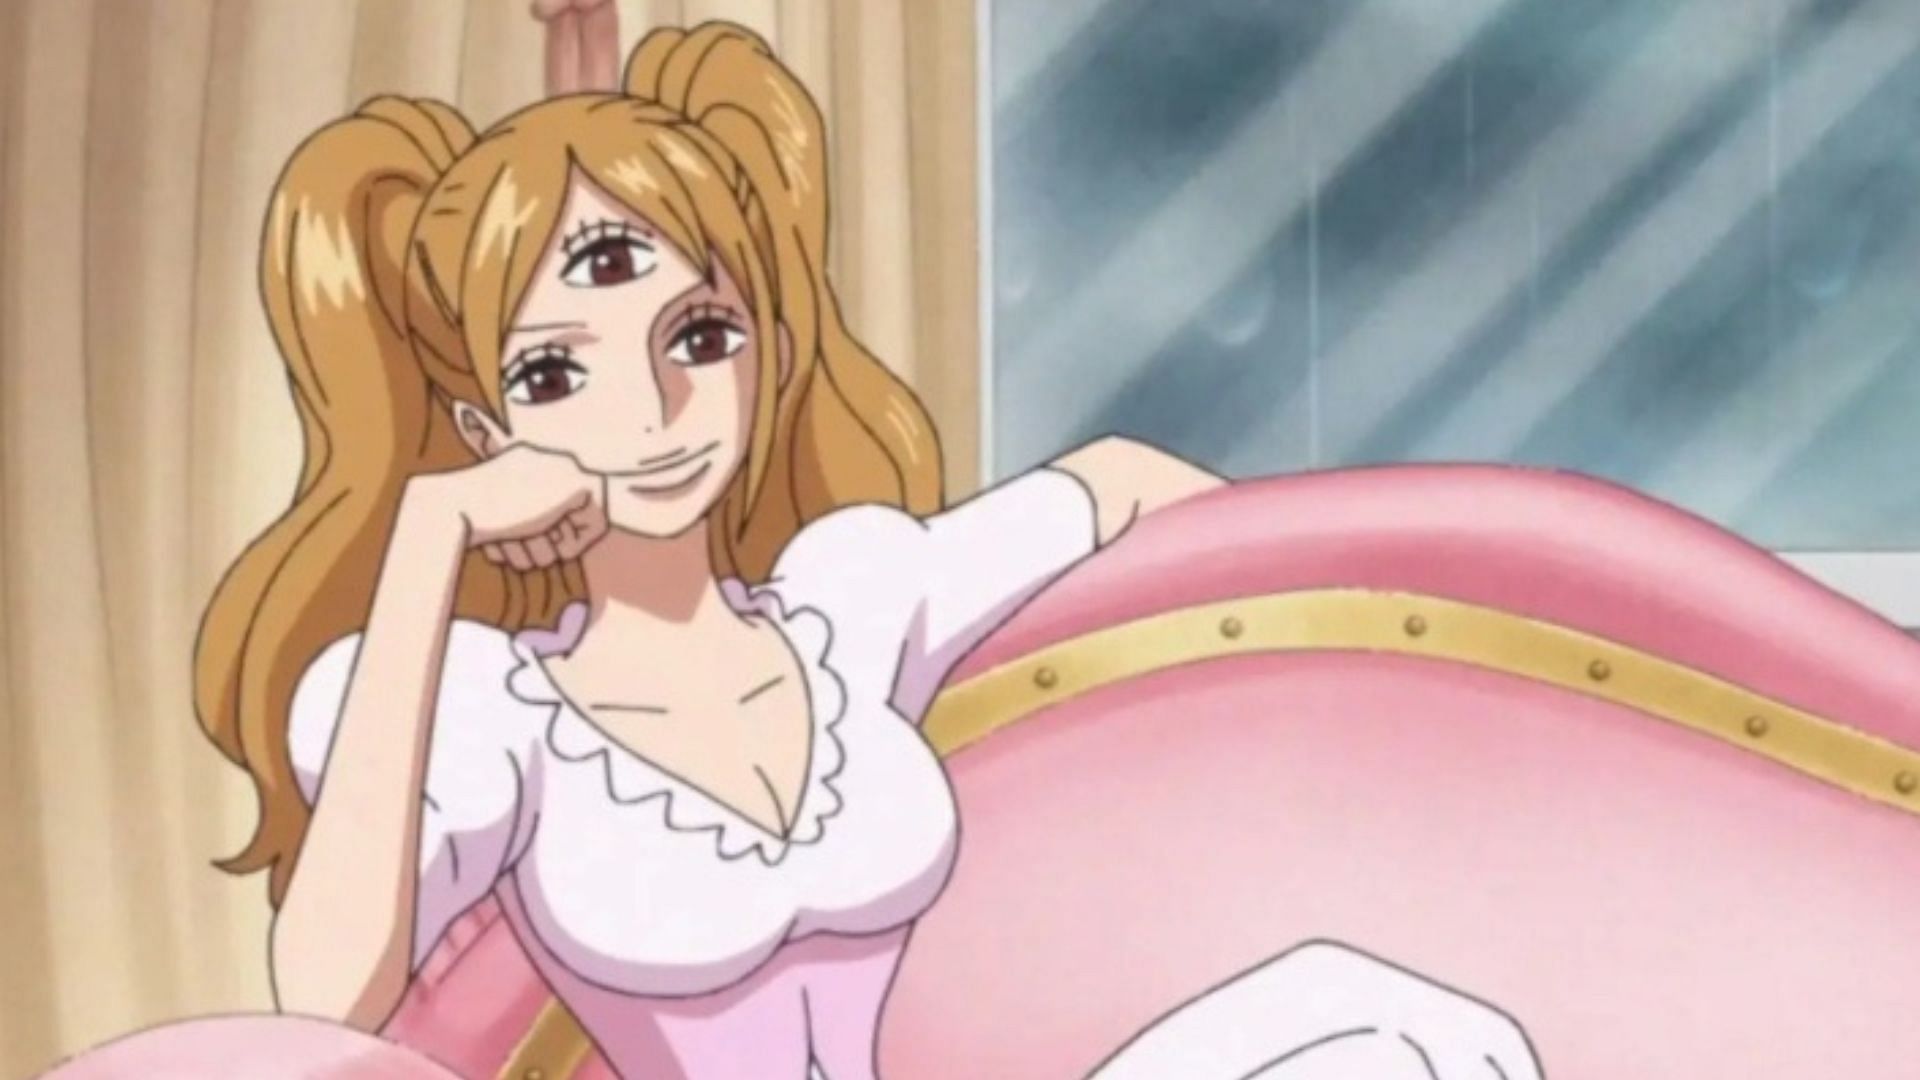 Pudding as seen in One Piece anime (Image via Toei Animation)